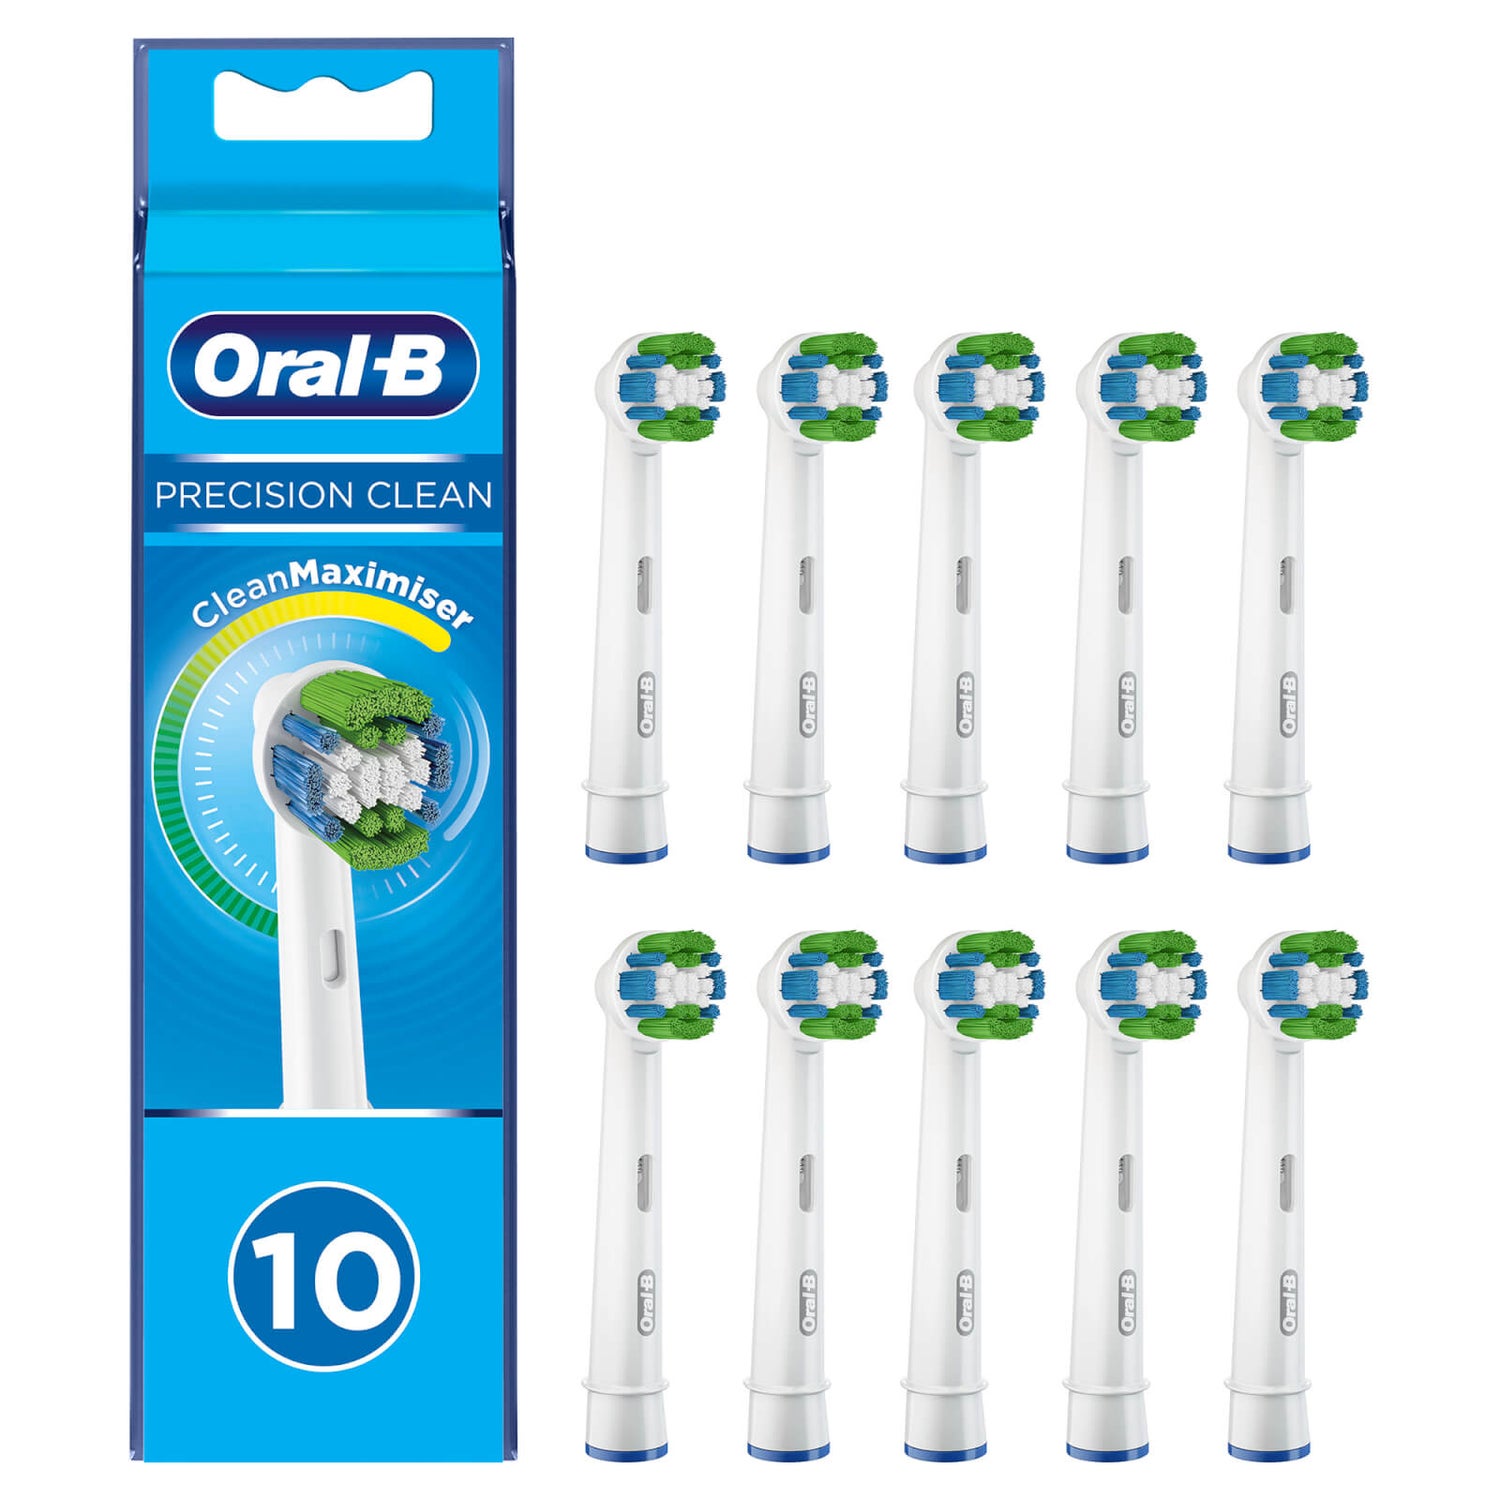 Oral-B Precision Clean Toothbrush Head with CleanMaximiser Technology, Pack of 10 Counts